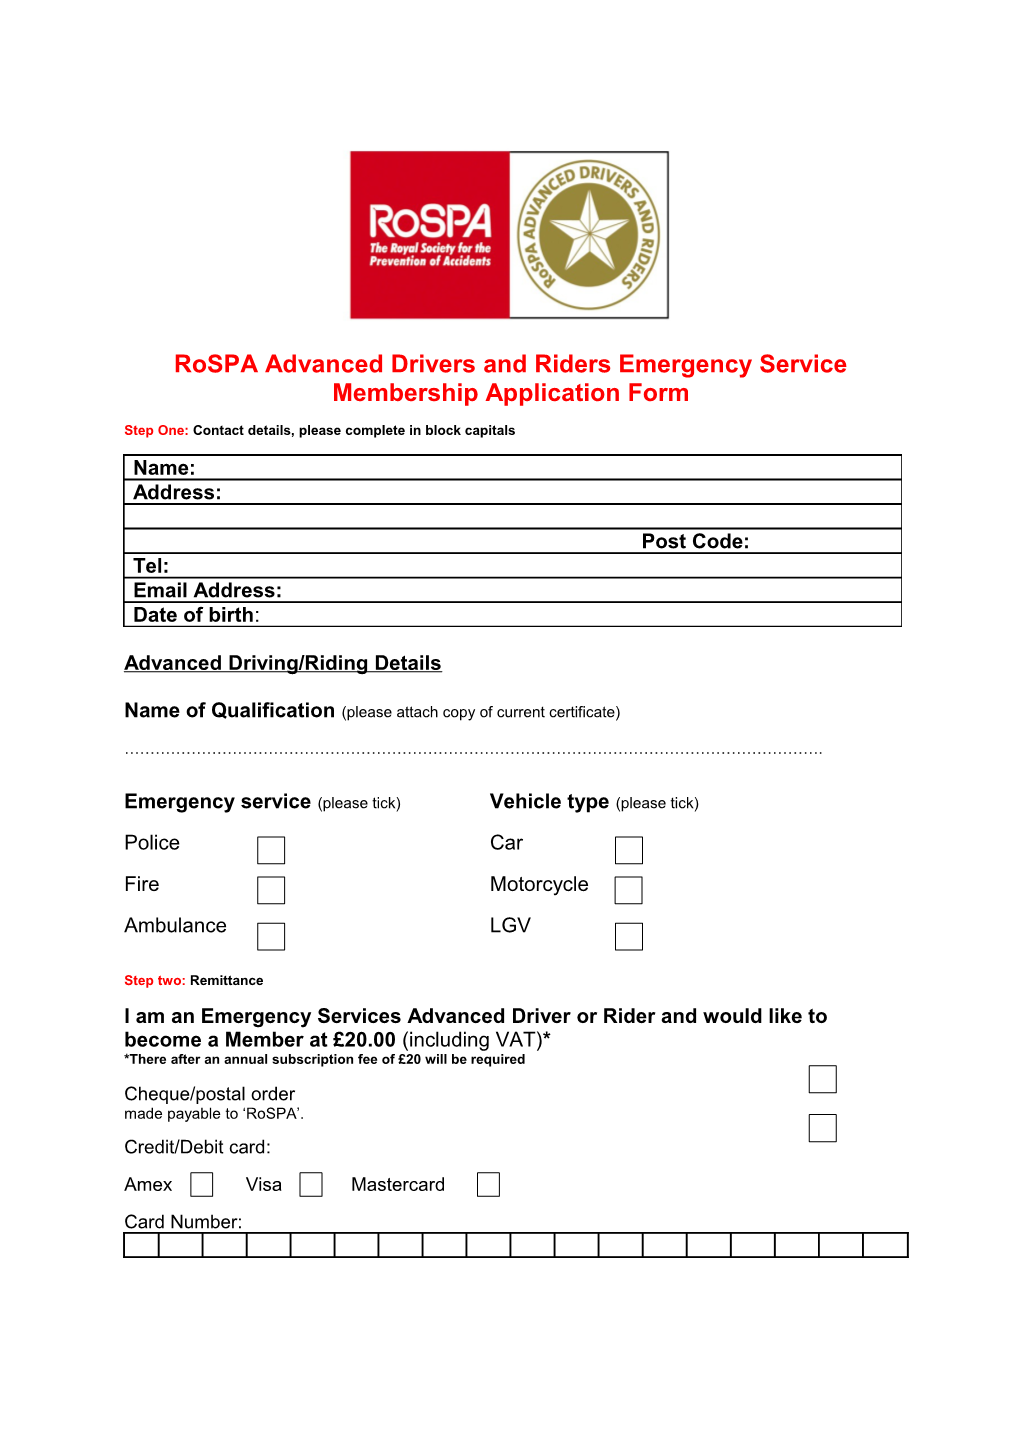 Rospa Advanced Drivers and Riders Emergency Service Membership Application Form